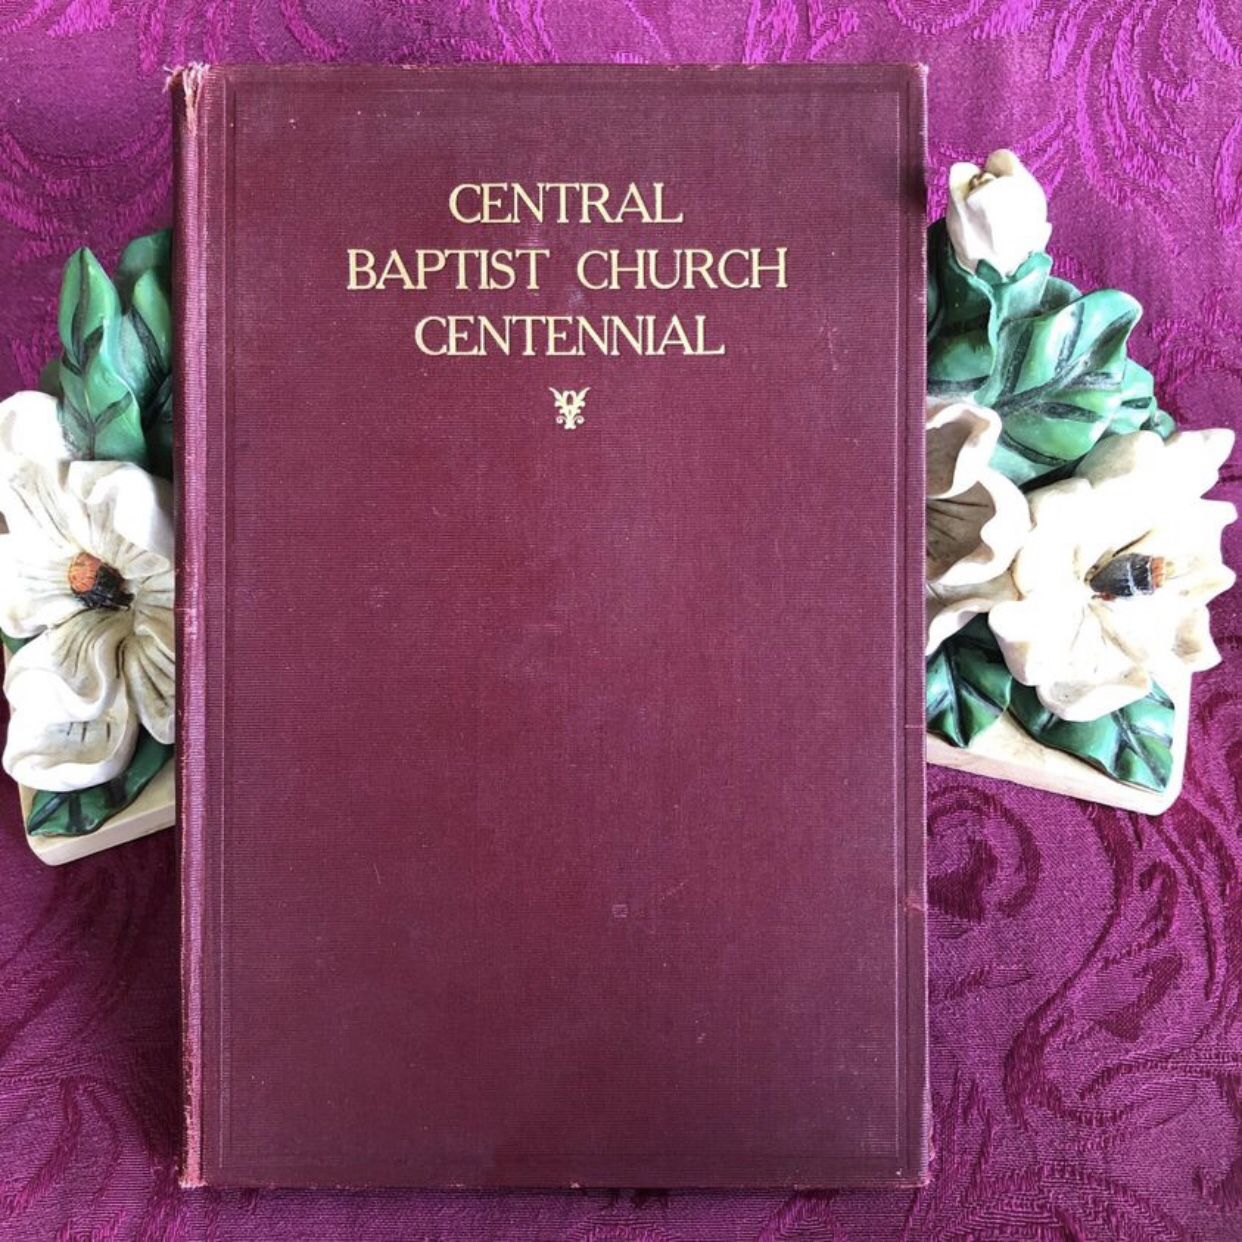 1905 Antique Book: The Centennial Services of the Central Baptist Church. Providence, Rhode Island (by Rev. Clarence M. Gallup, D.D.)  This 117 year o